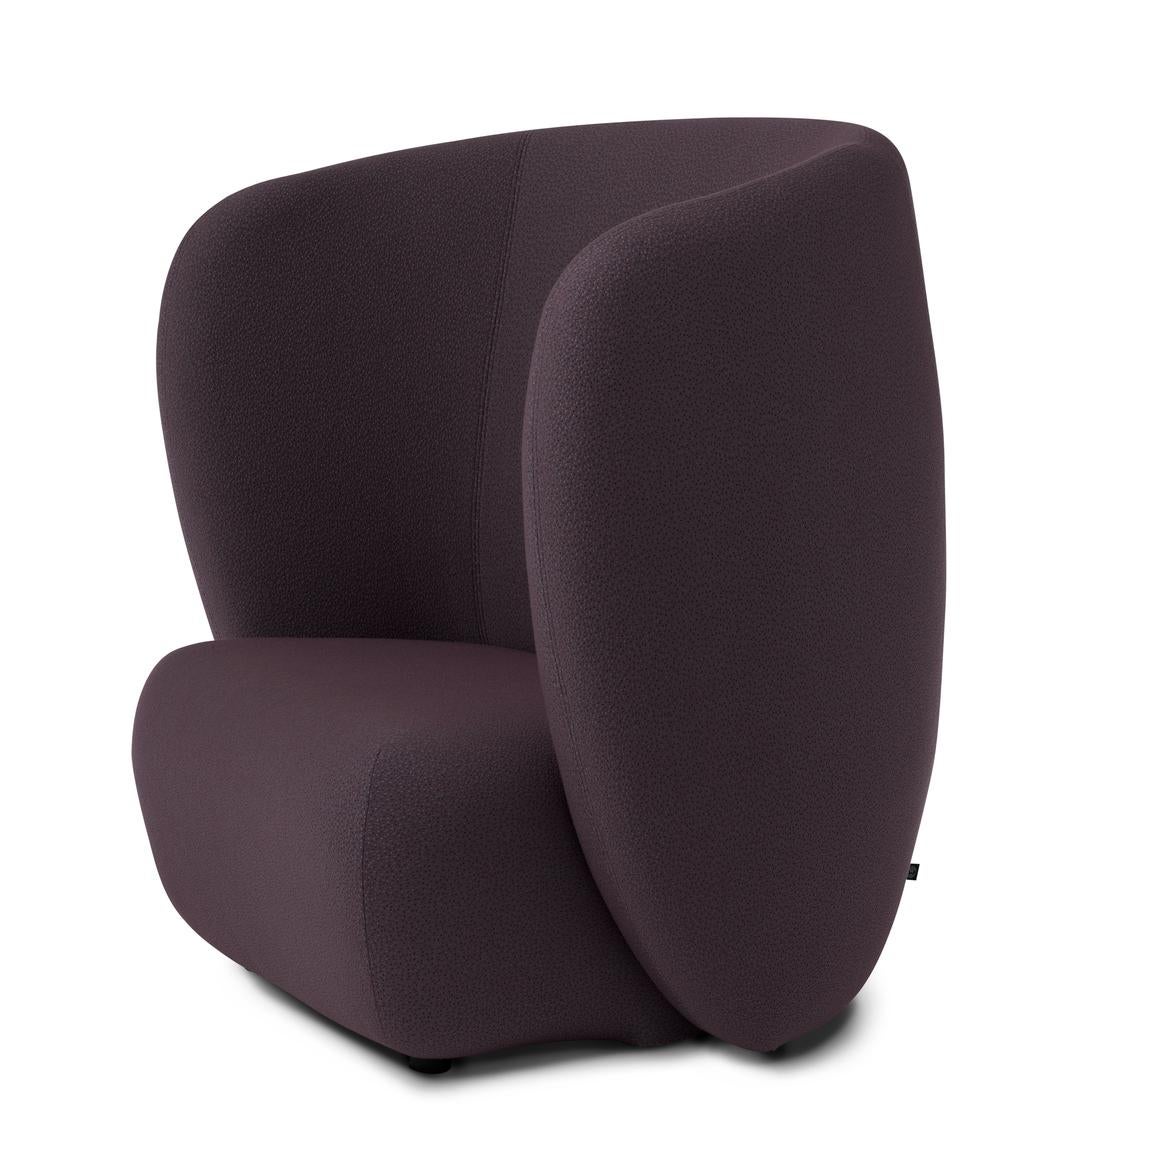 Post-Modern Haven Lounge Chair Sprinkles Eggplant by Warm Nordic For Sale